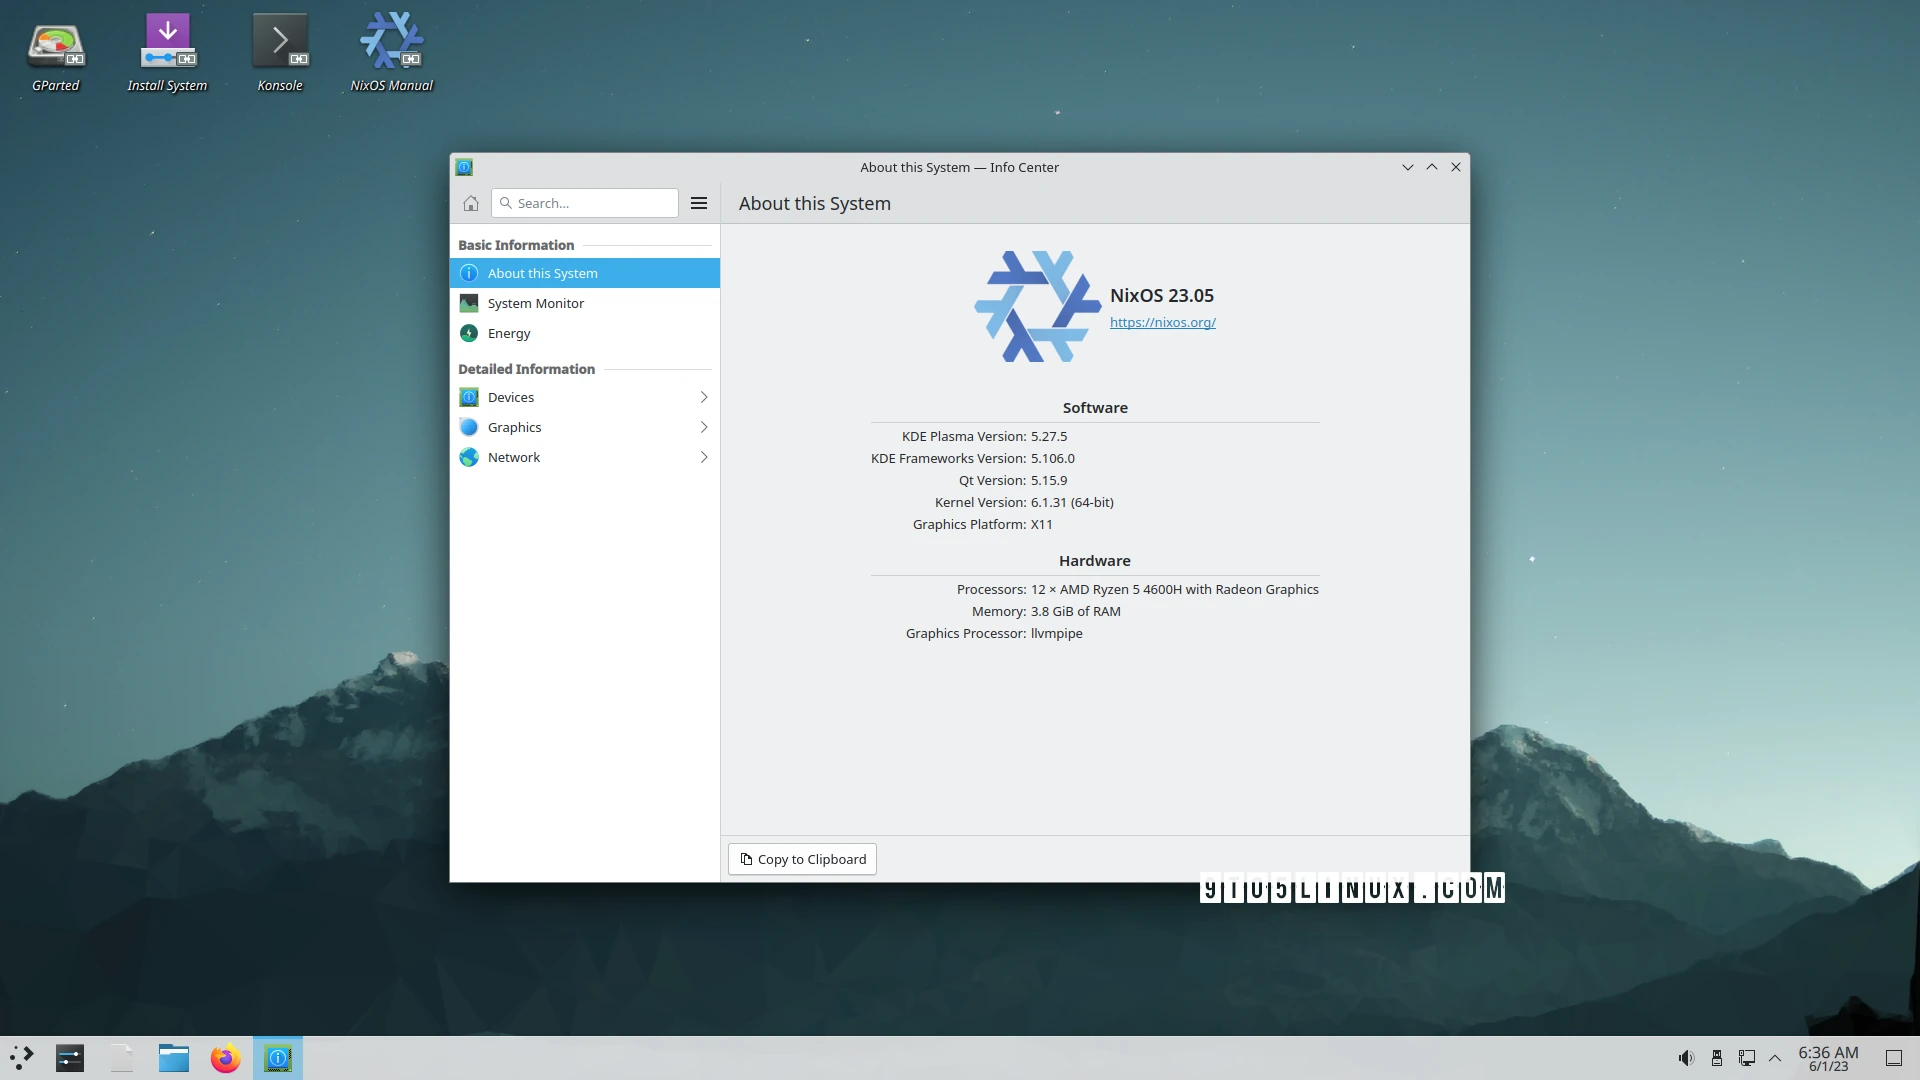 NixOS 23.05 Released with GNOME 44, KDE Plasma 5.27 LTS, and Linux 6.1 LTS